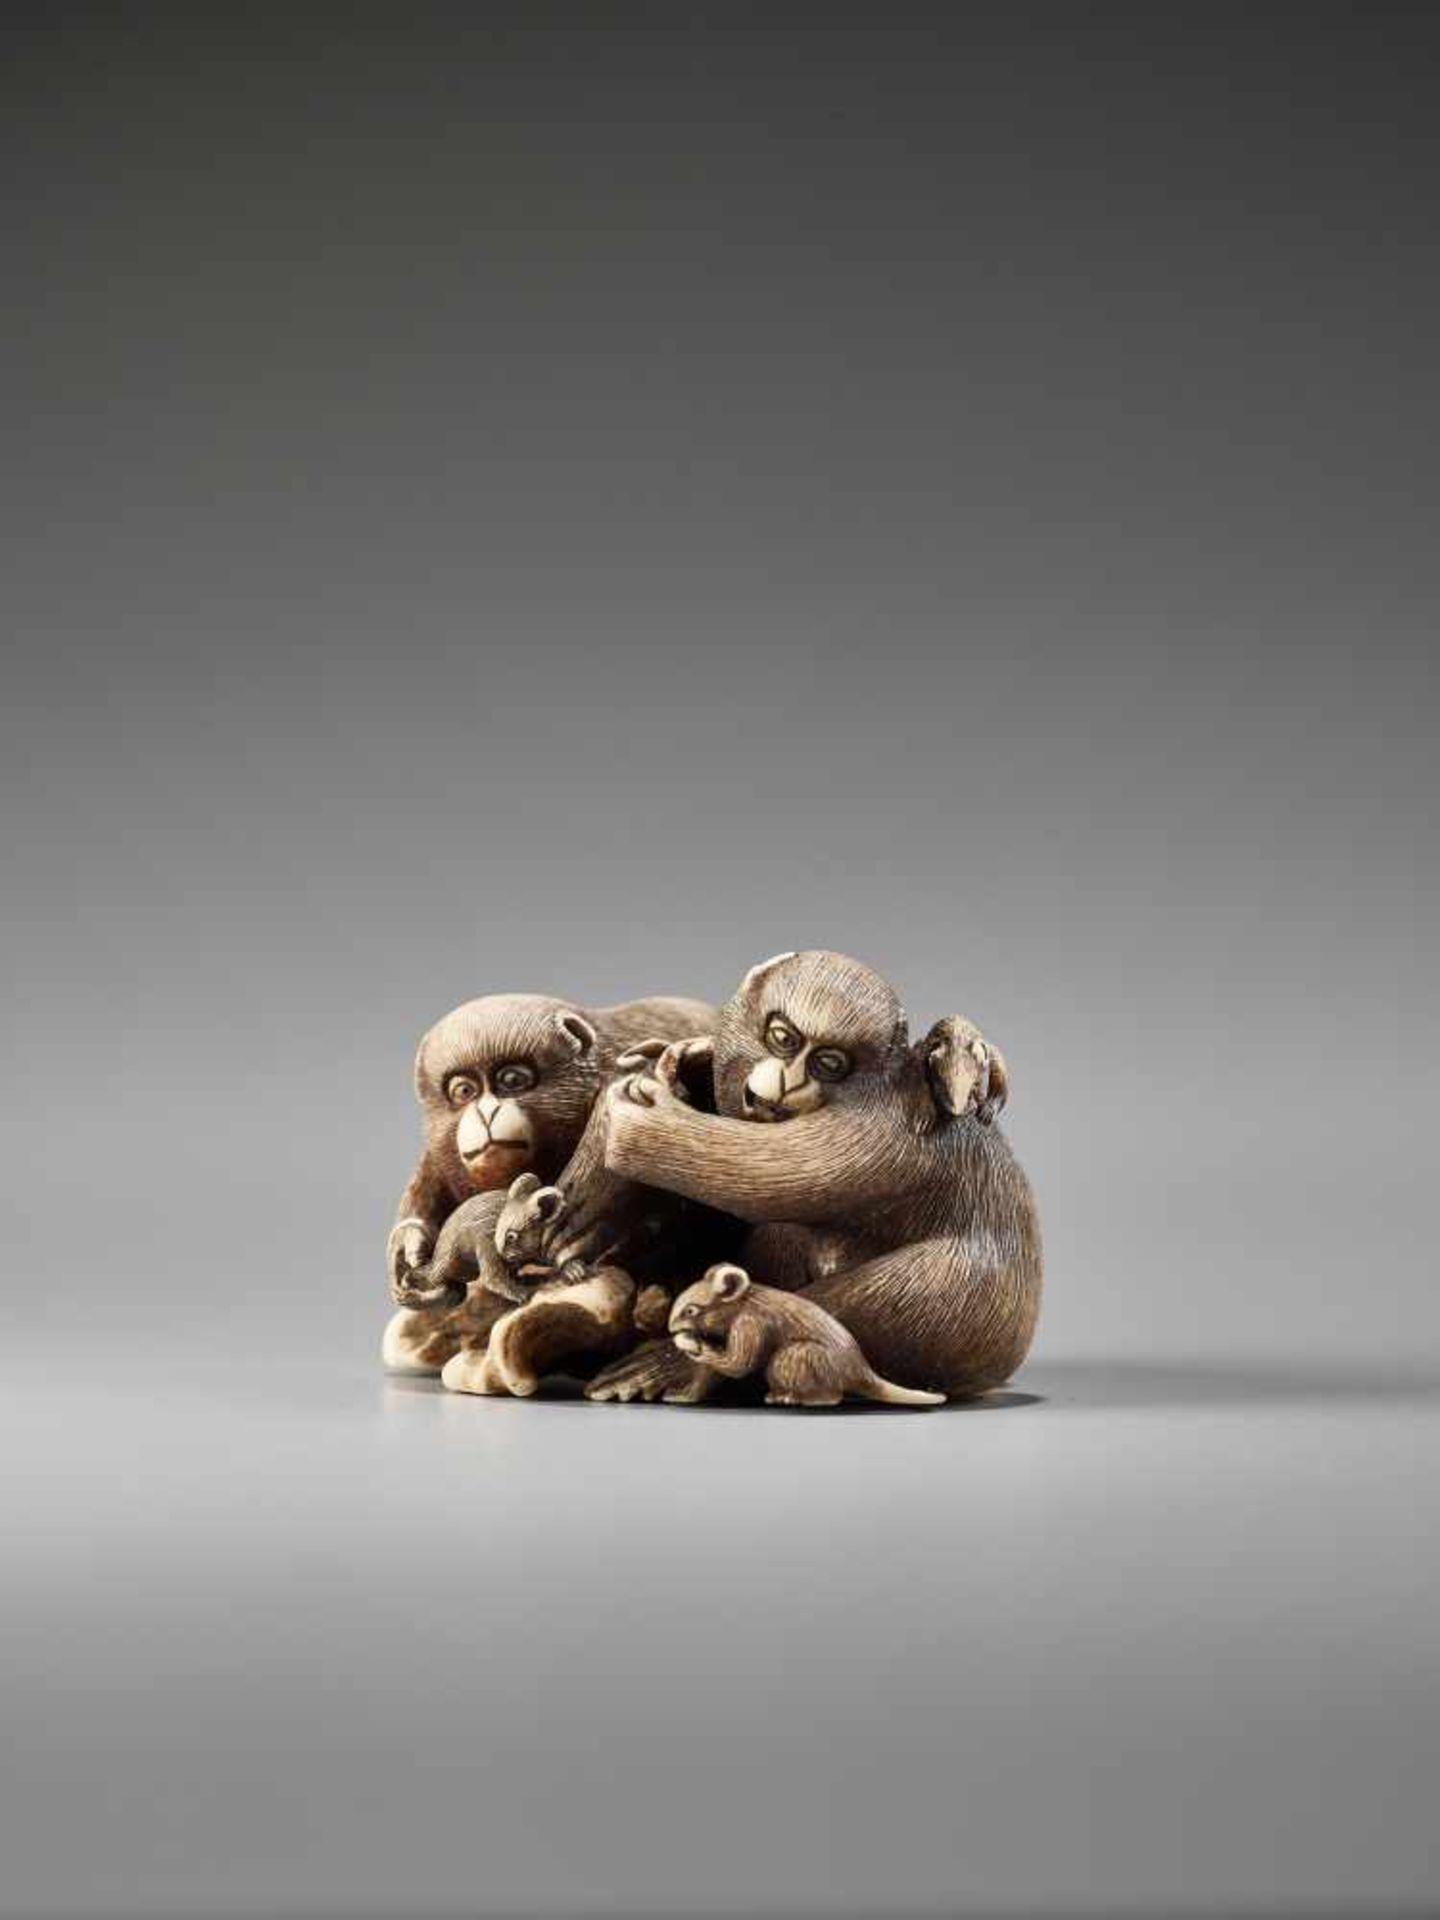 AN IVORY NETSUKE OF MONKEYS AND RATS BY GYOKUMINBy Gyokumin, ivory netsukeJapan, 19th century, Edo - Image 2 of 7